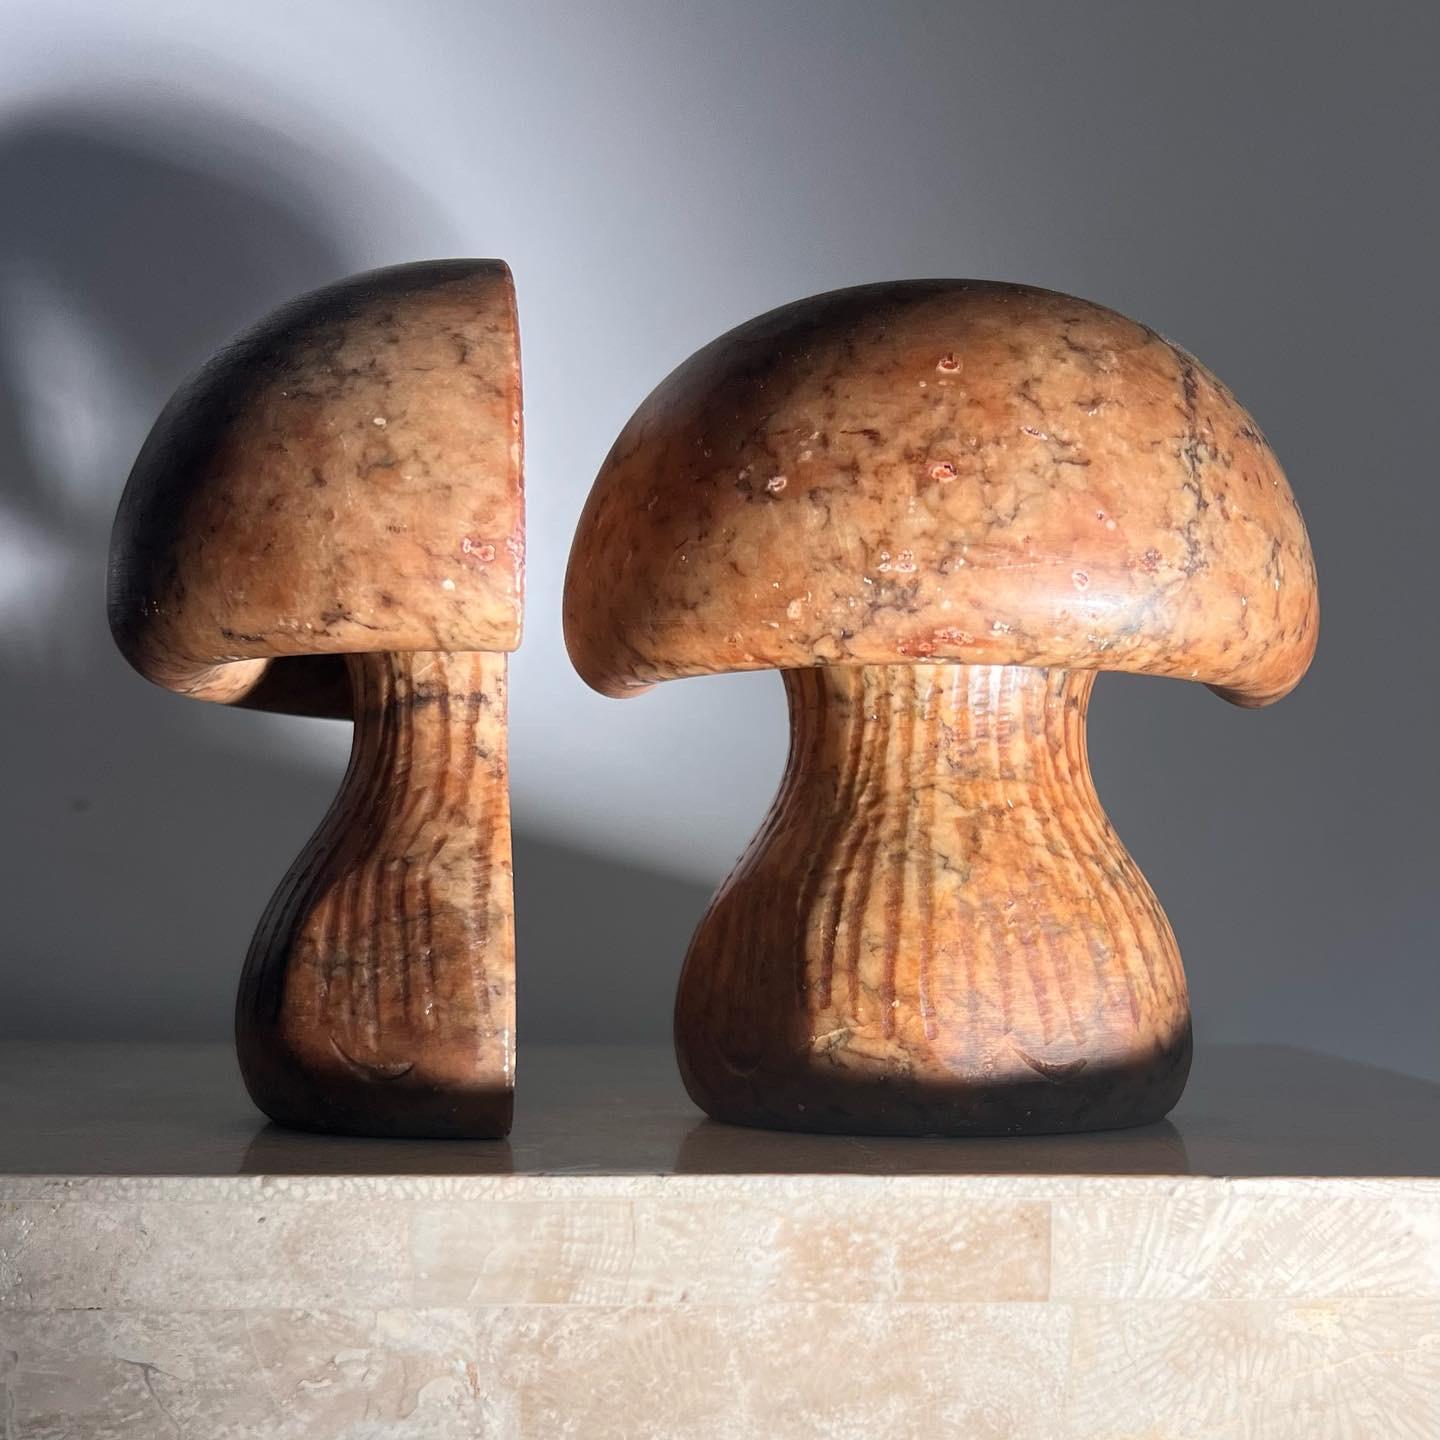 A pair of vintage Italian mushroom marble bookends, made in Italy 1960s. Tones of toffee and pewter. Unique engraved pinstripe motif on bases. Pick up in LA or we ship worldwide.
5.5” W x 6” D x 6.25” 